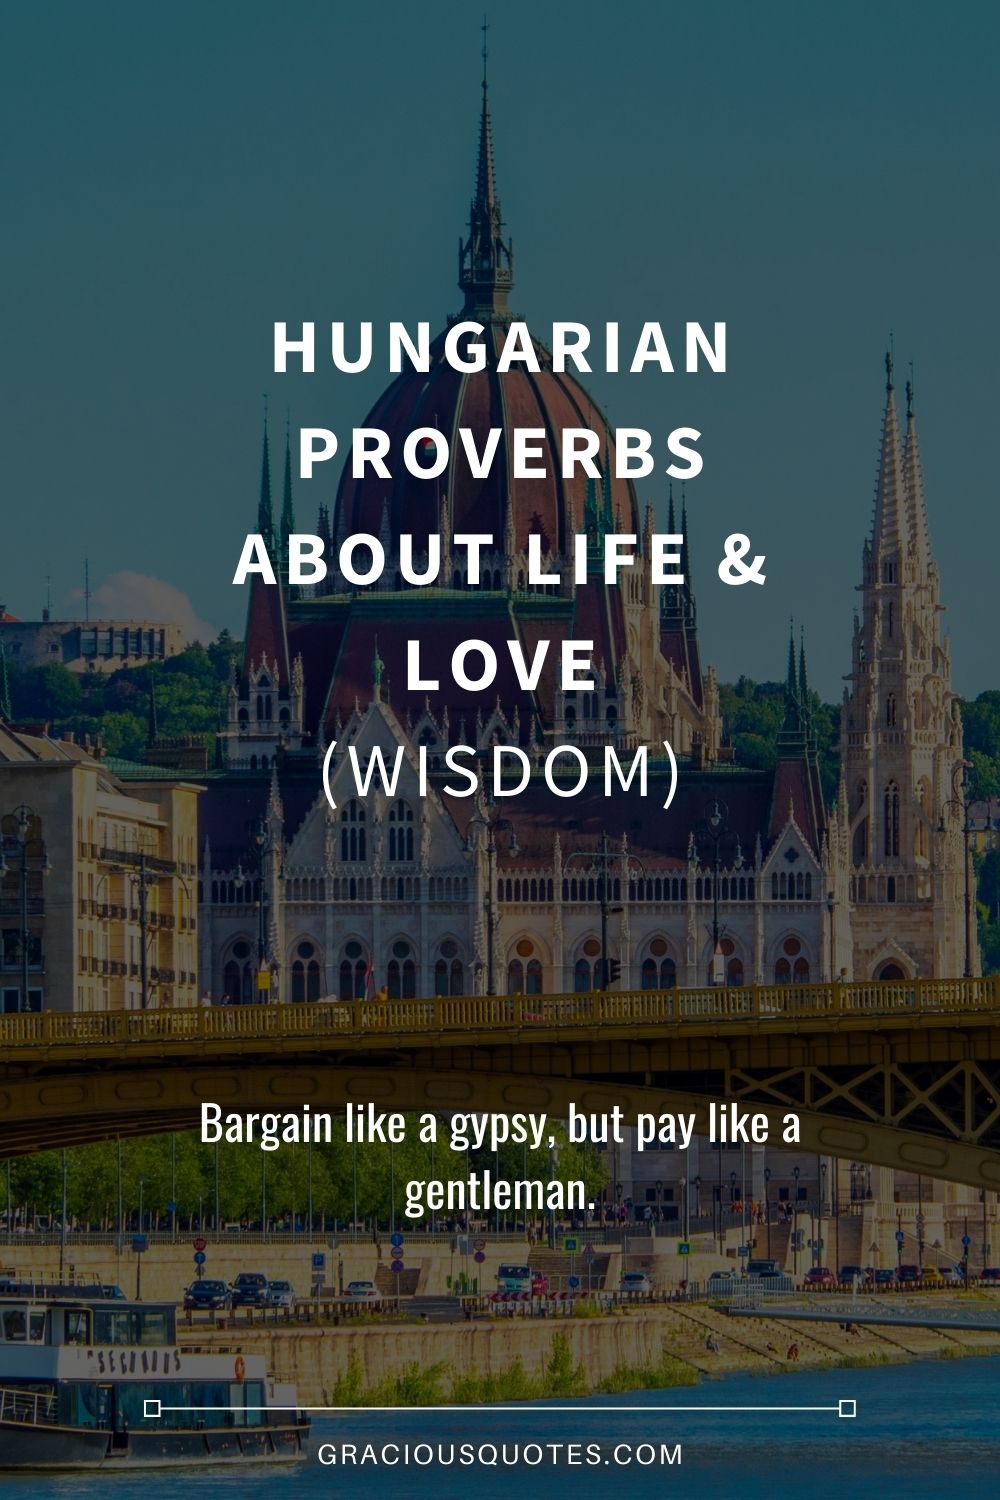 Hungarian Proverbs About Life & Love (WISDOM) - Gracious Quotes